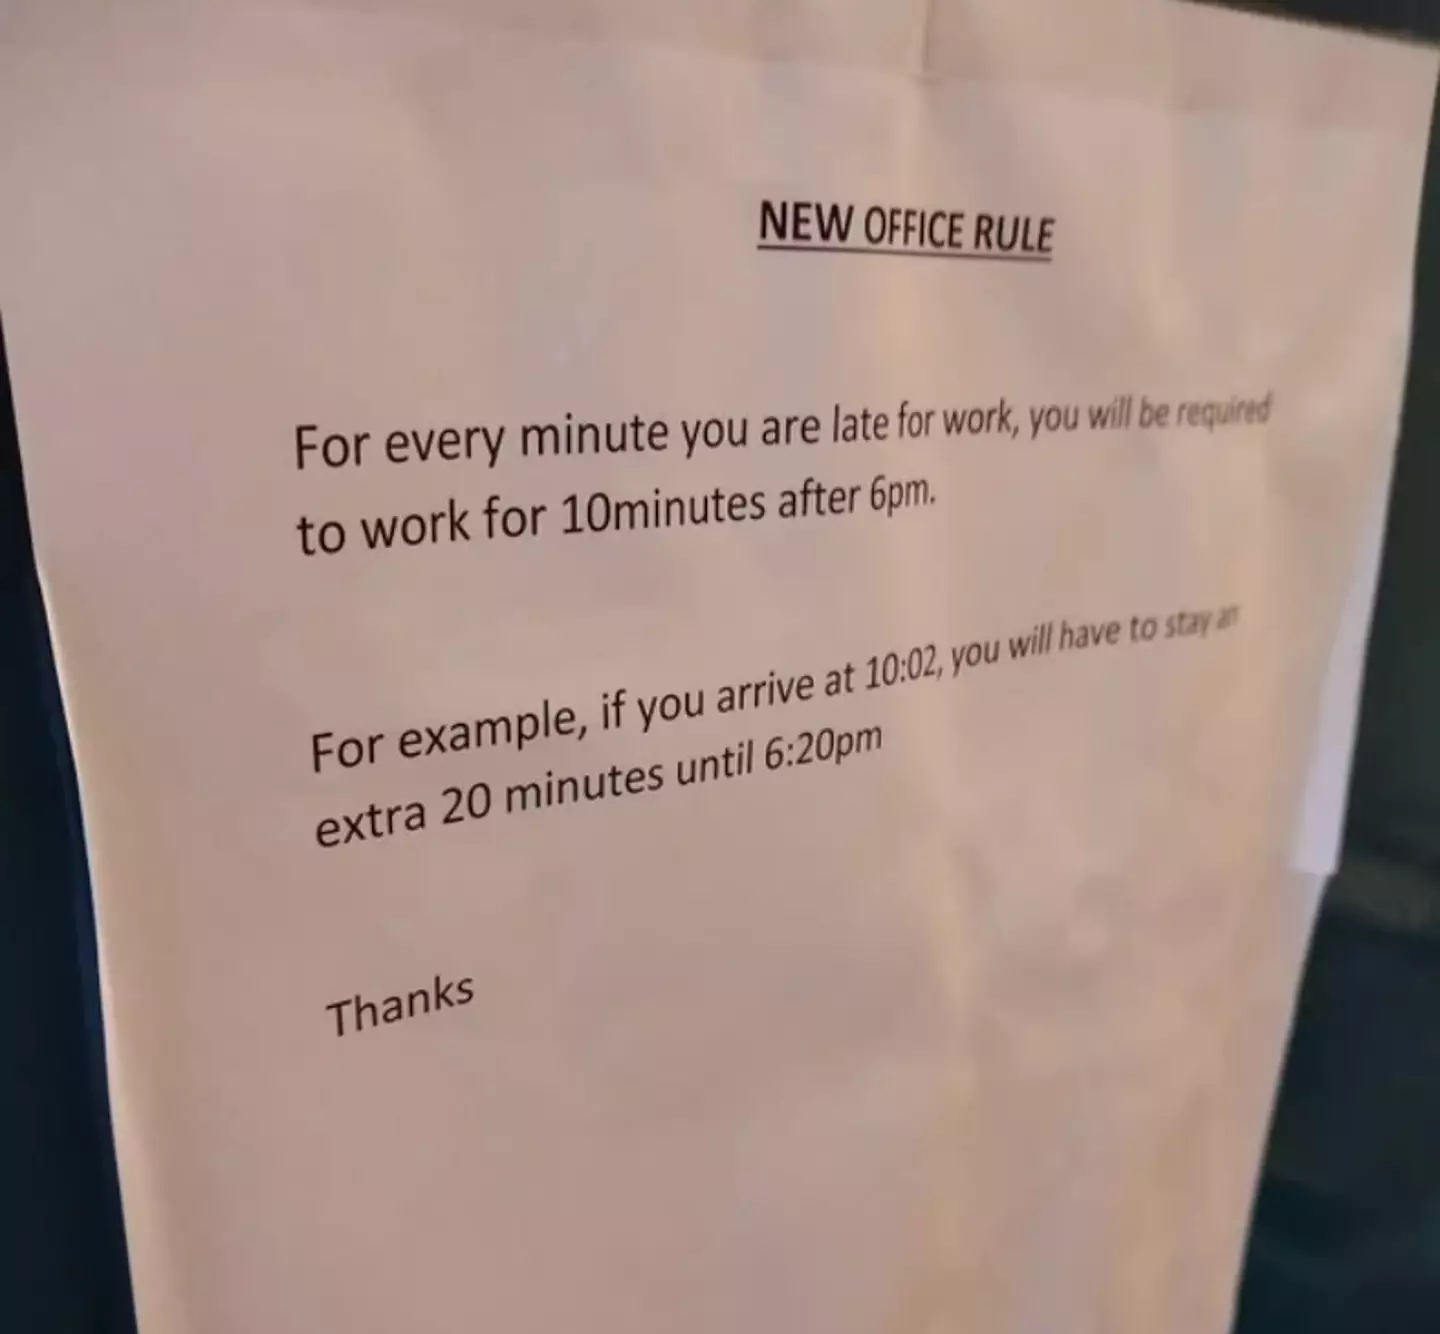 The office rules told staff that for every minute they were late they would have to make up 10 minutes at the end of the day.